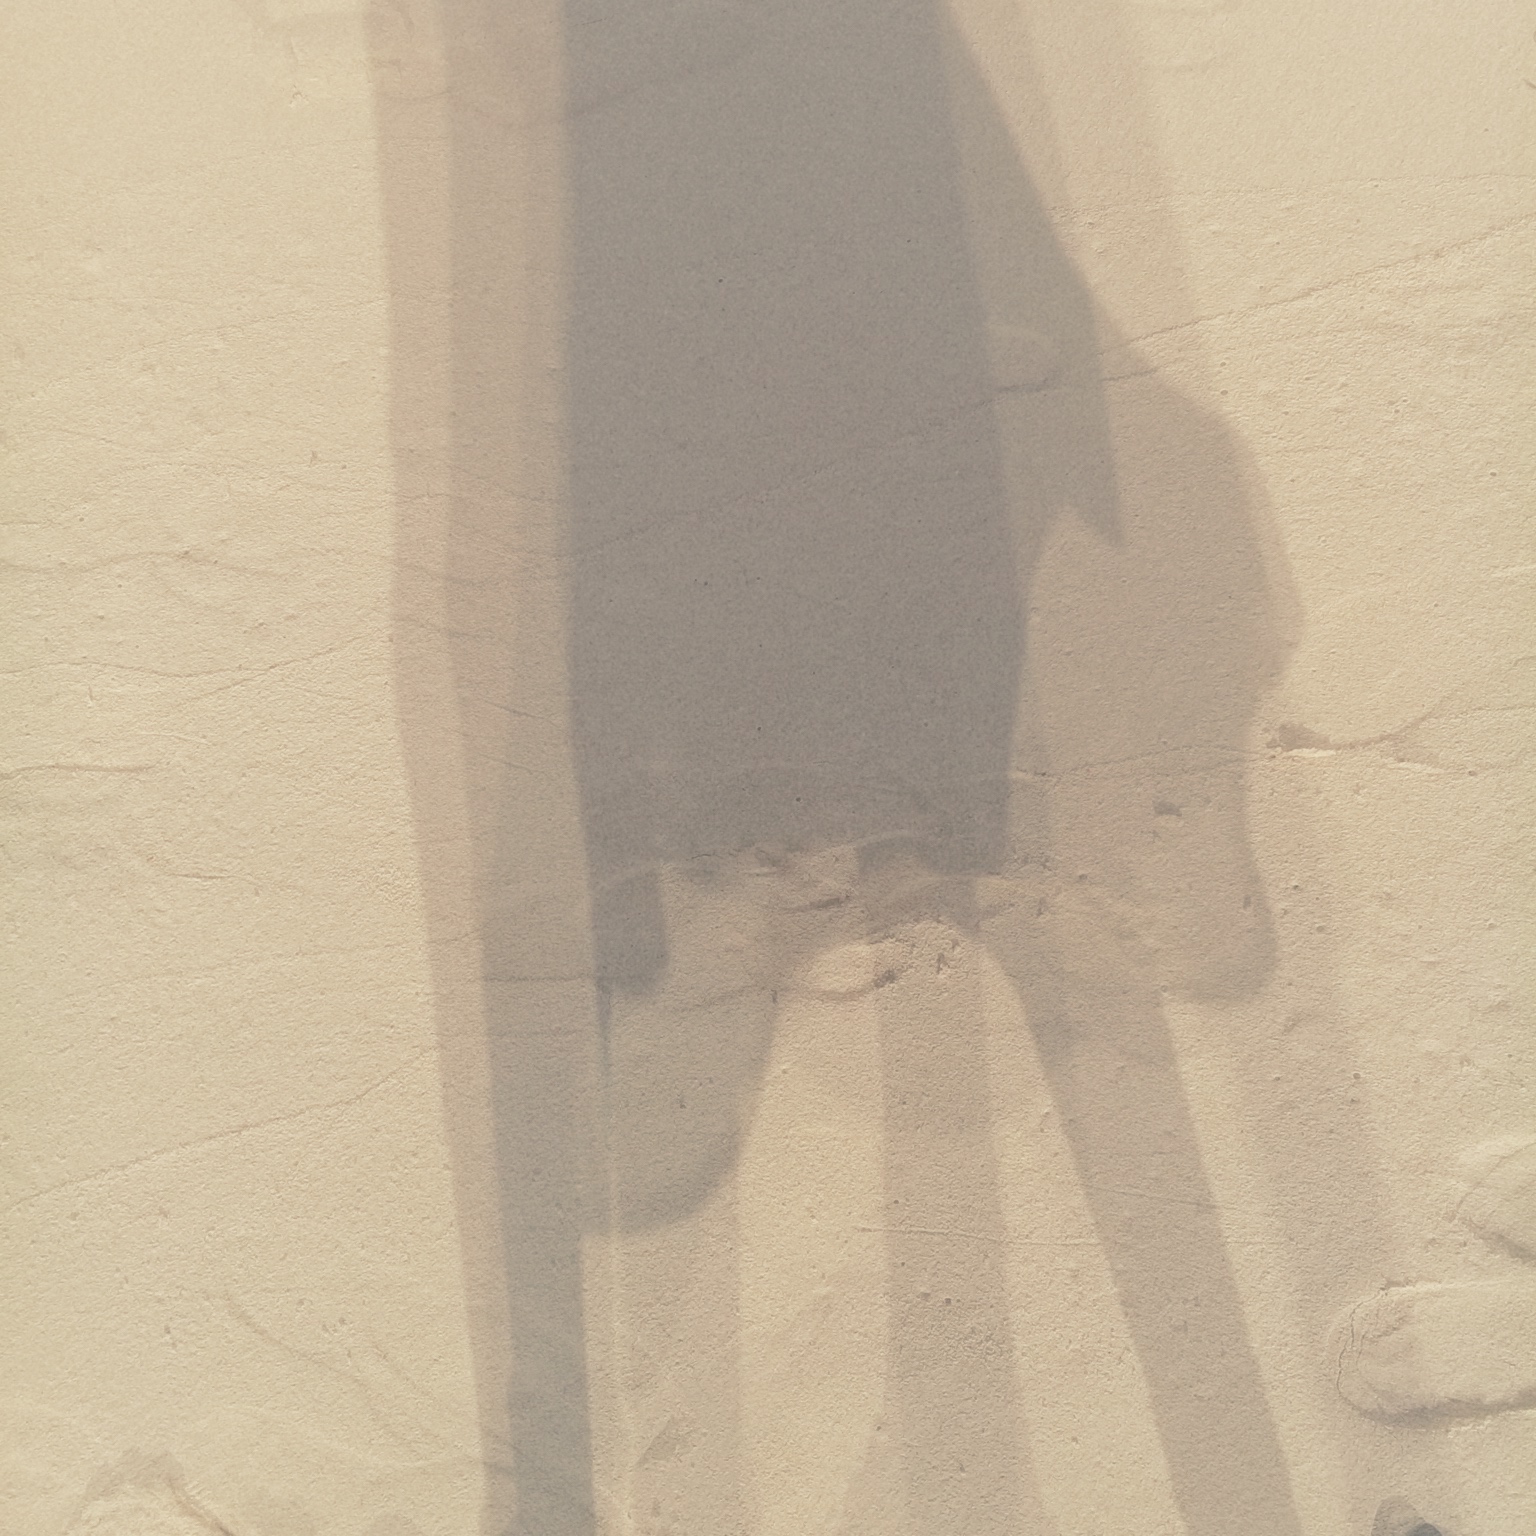 A multi-exposed photograph of a person's shadows over beach sand.